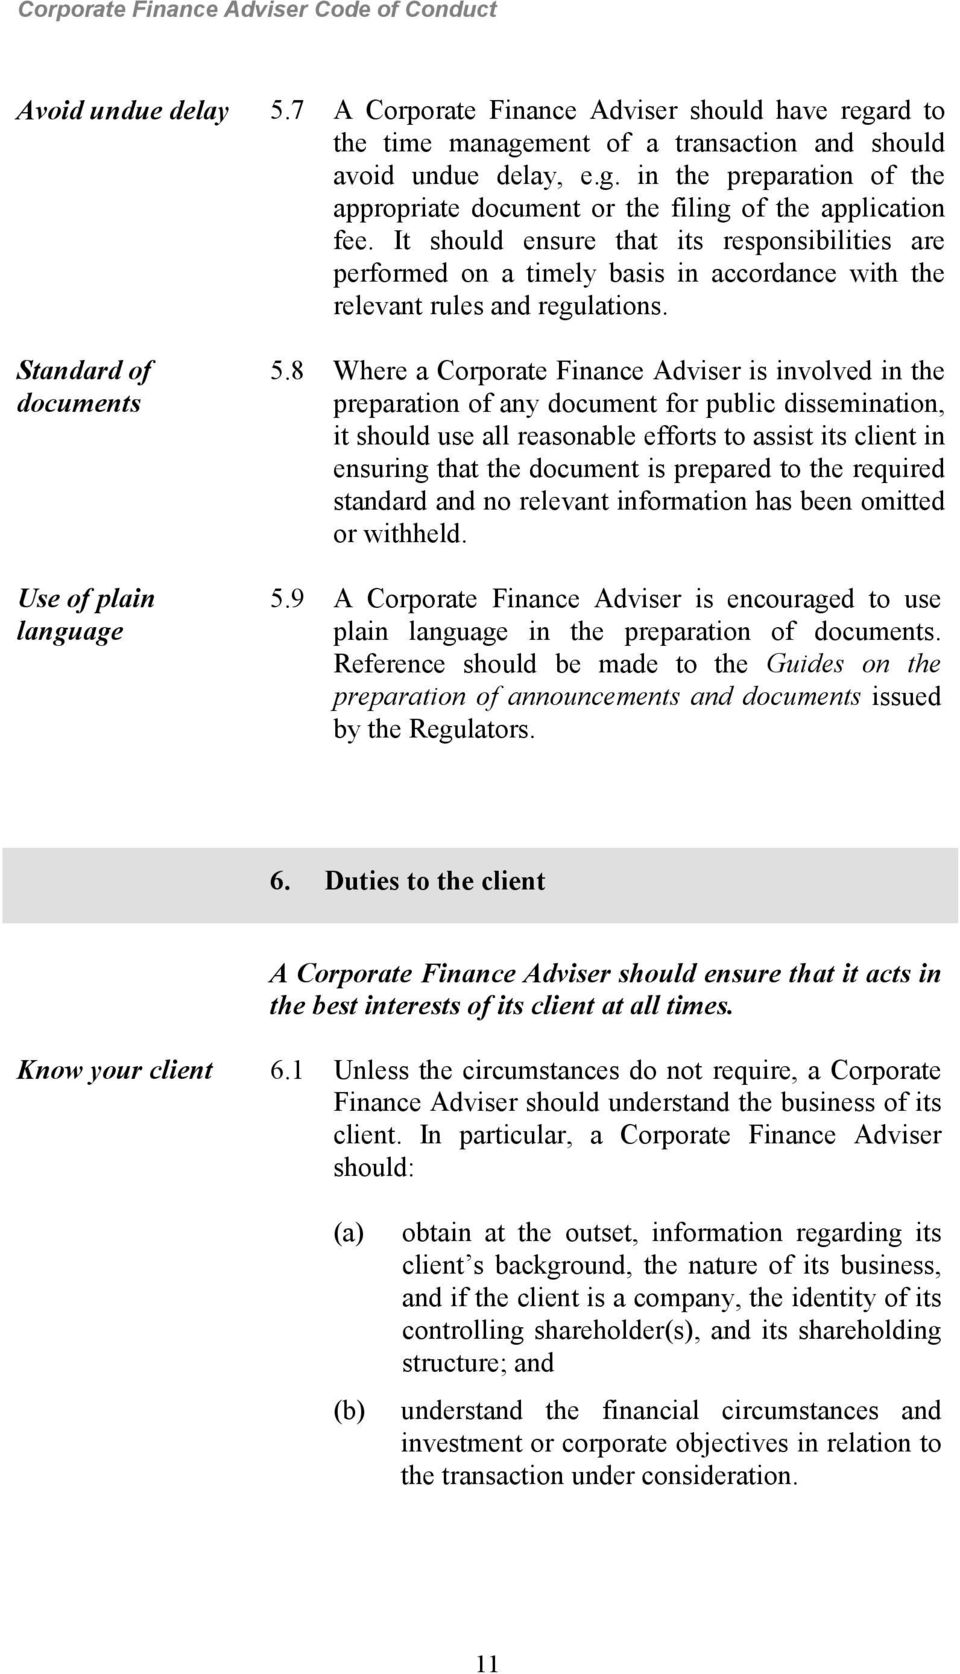 8 Where a Corporate Finance Adviser is involved in the preparation of any document for public dissemination, it should use all reasonable efforts to assist its client in ensuring that the document is